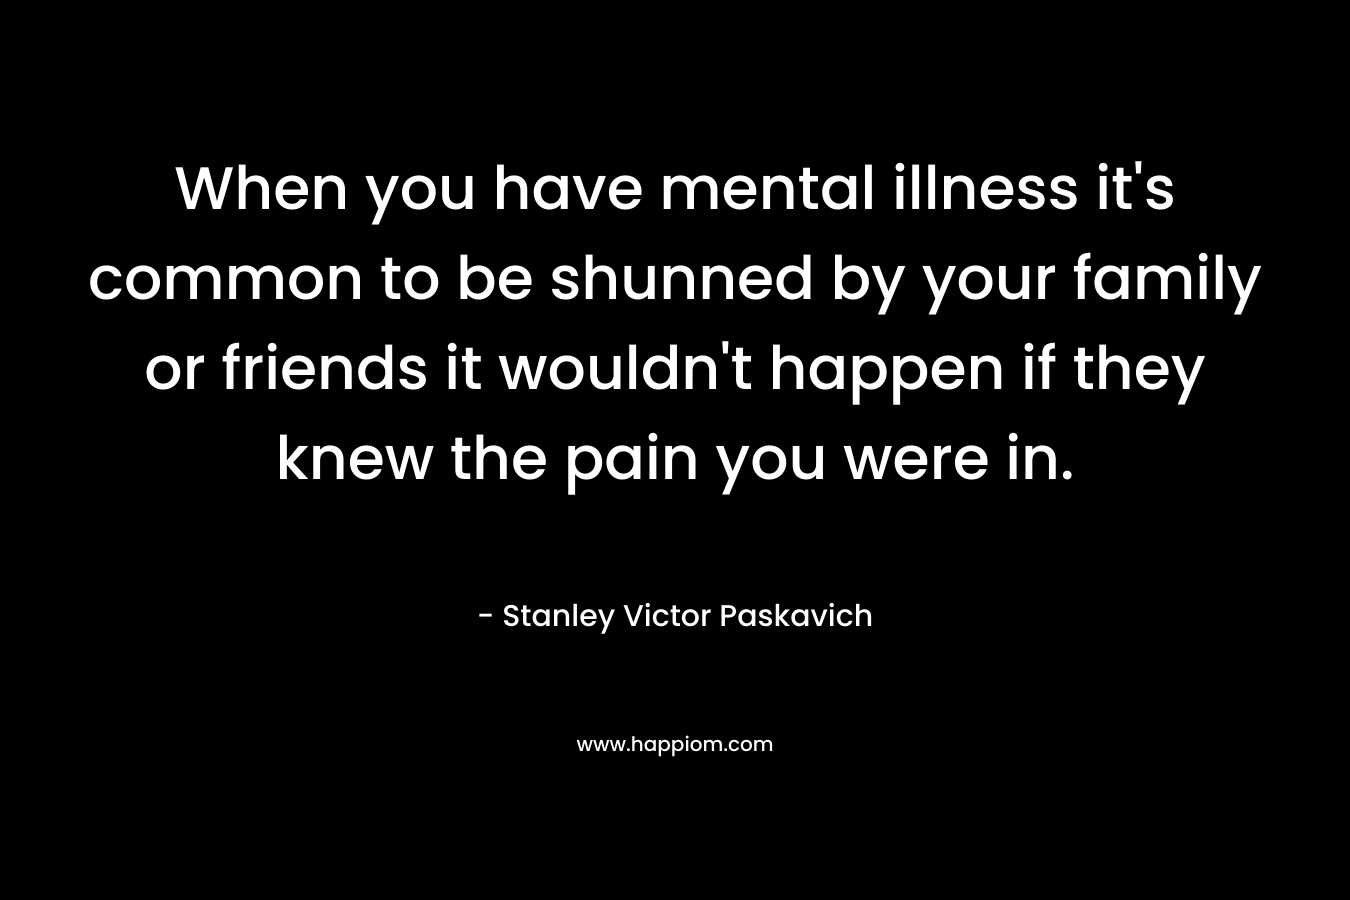 When you have mental illness it's common to be shunned by your family or friends it wouldn't happen if they knew the pain you were in.